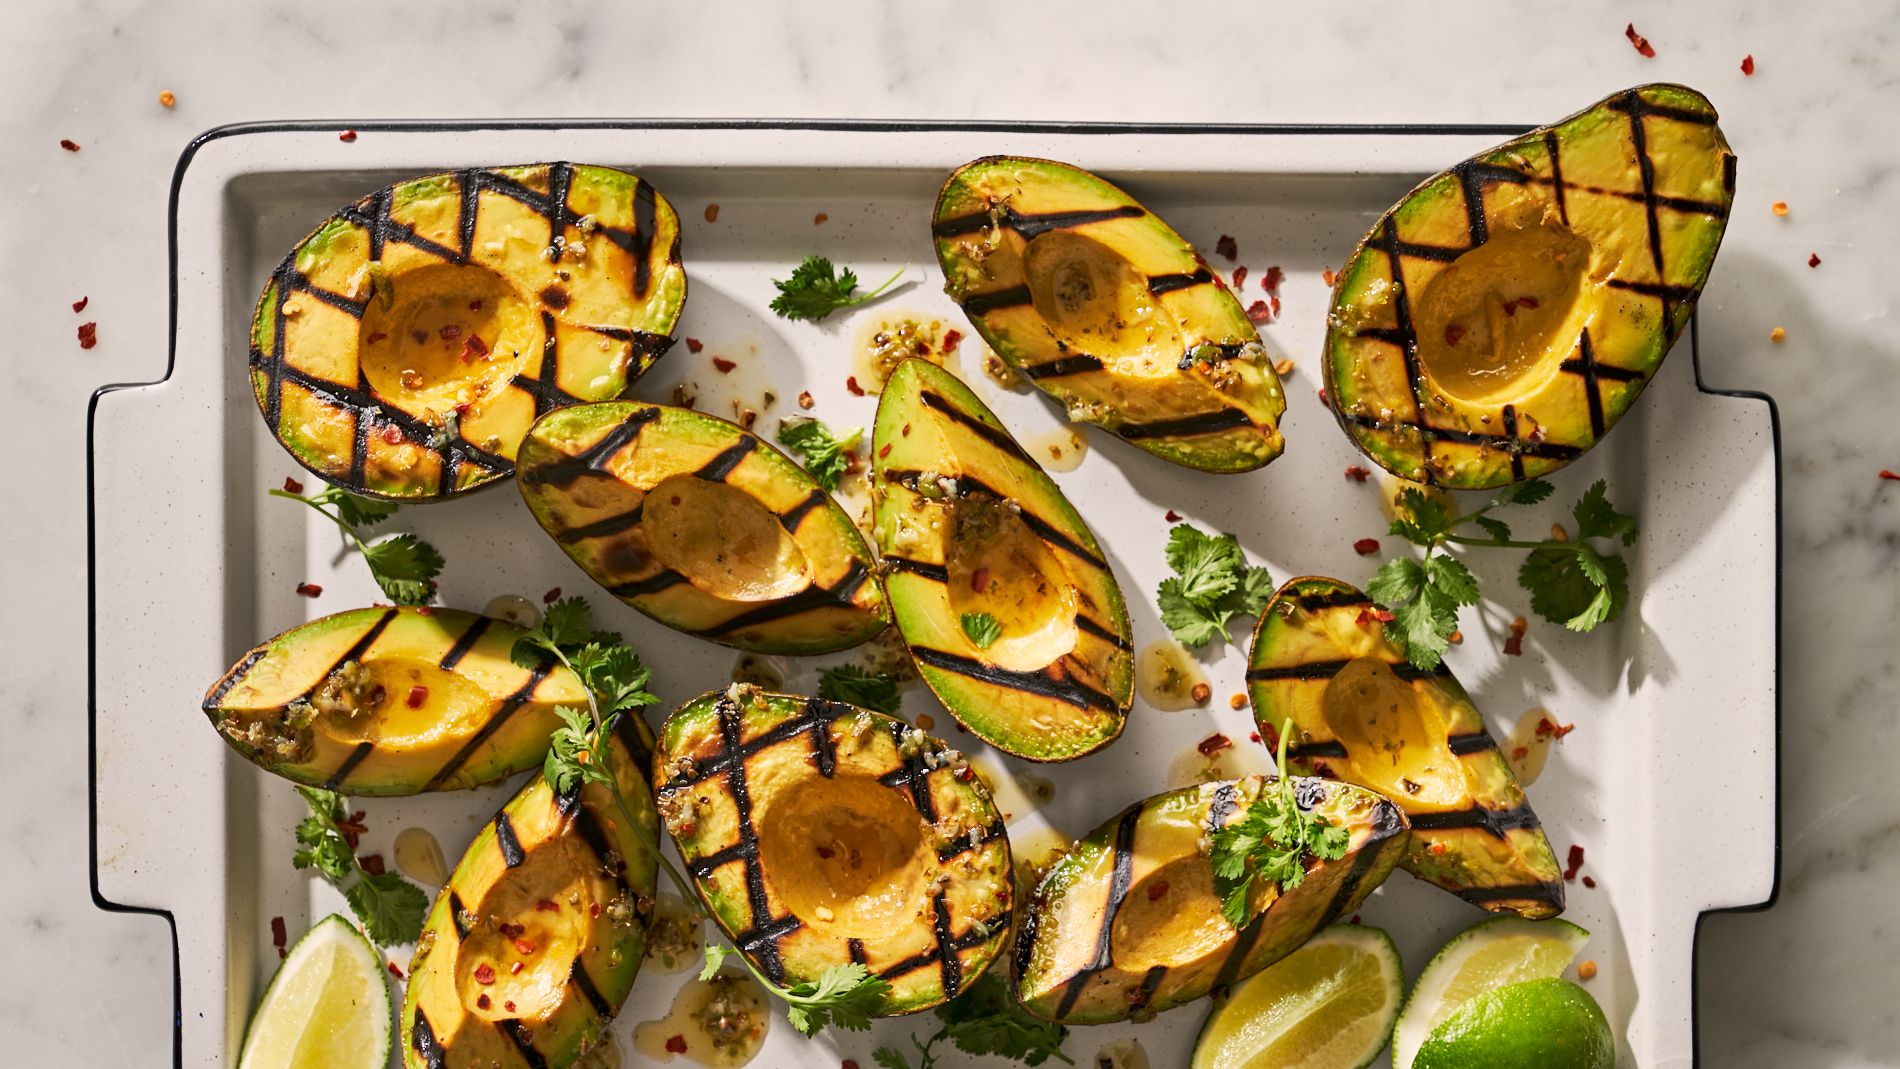 https://hips.hearstapps.com/hmg-prod/images/grilled-avocados1-1654092168.jpg?crop=1xw:0.8435280189423836xh;center,top